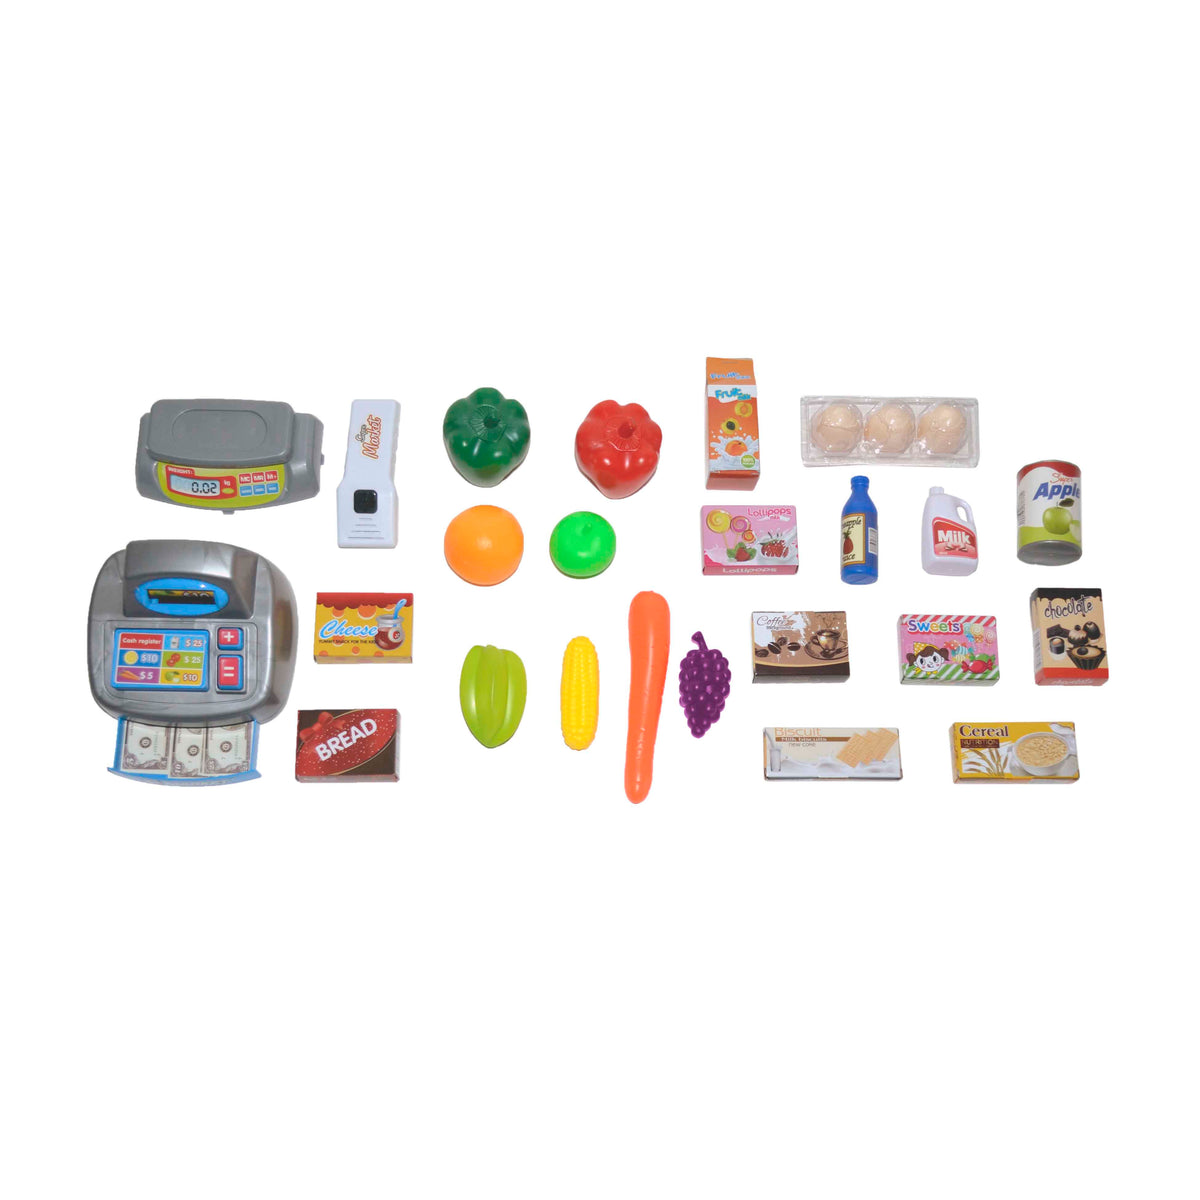 Accessories of the home supermarket play set - including a cash register, set of eggs, cereal box and veggies.